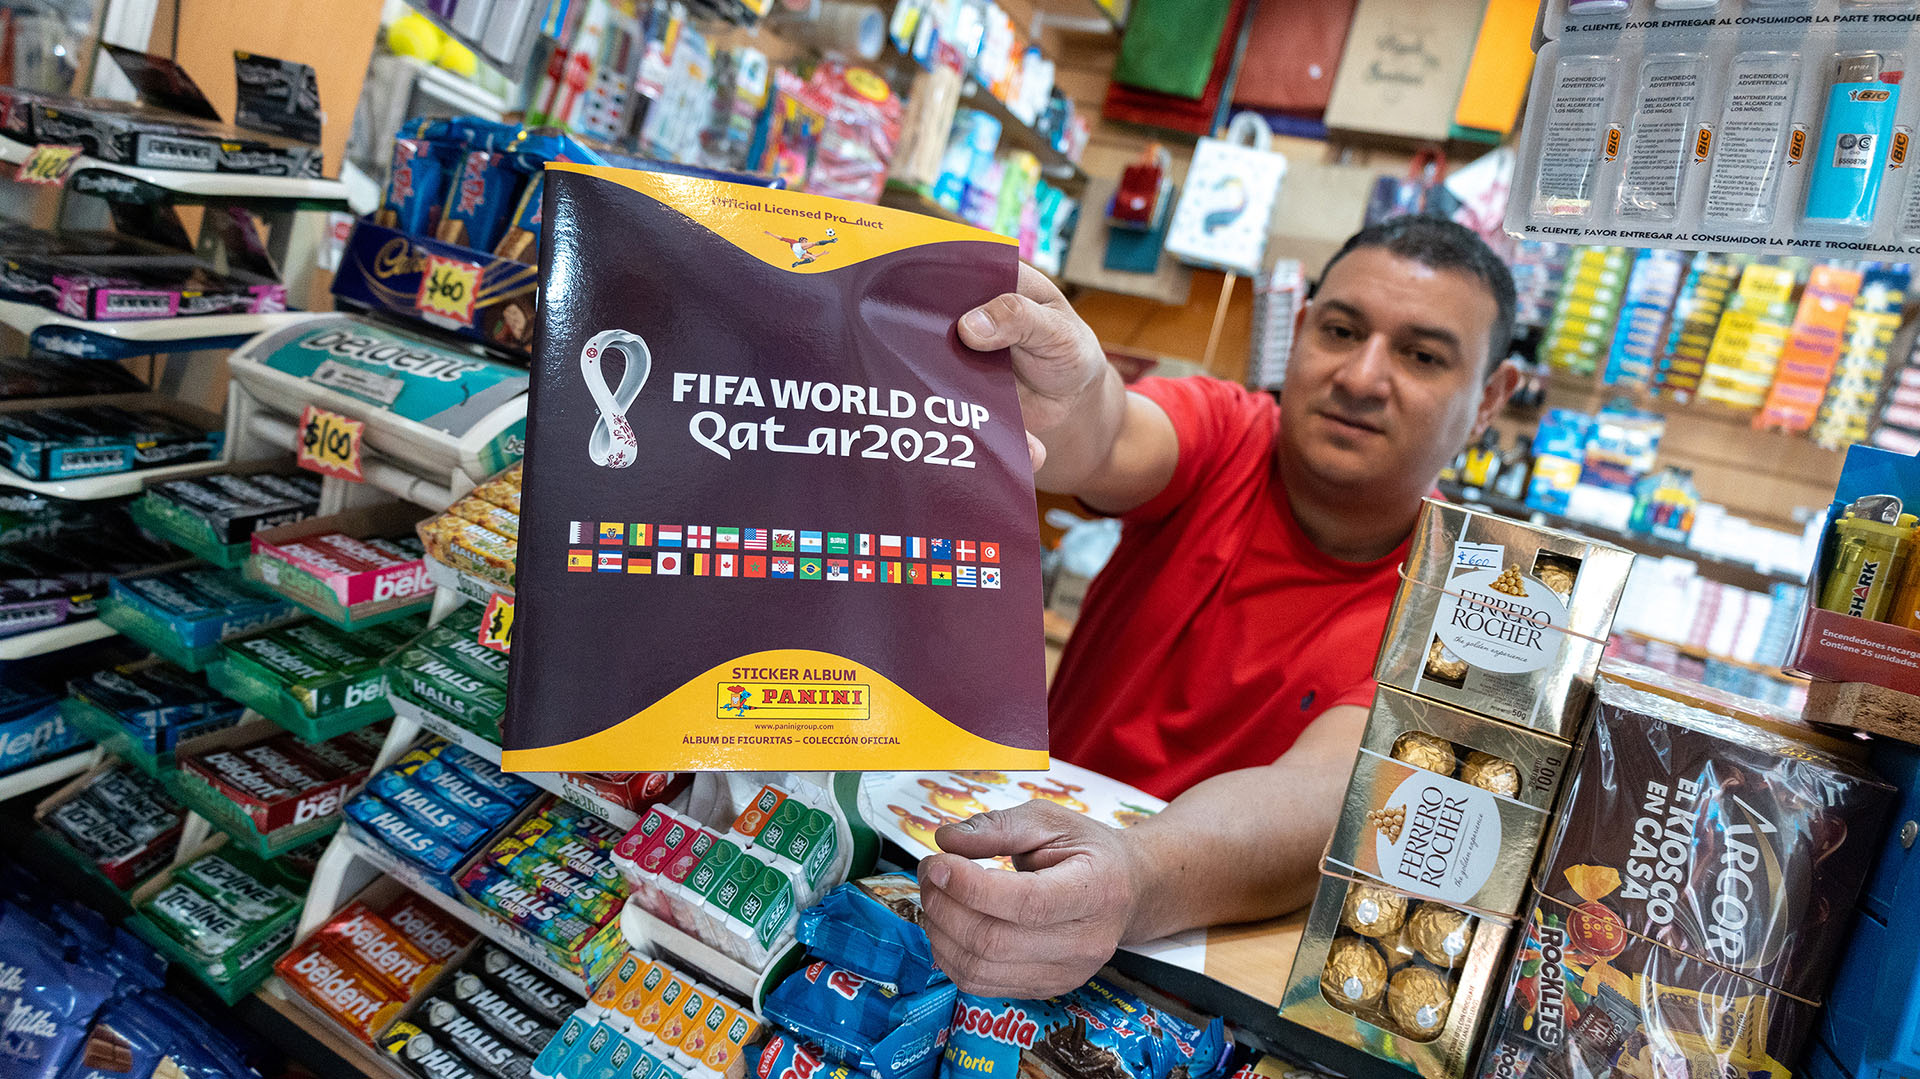 Sales of the Qatar 2022 figurine album exceeded the demand of the last World Cup which was a record 